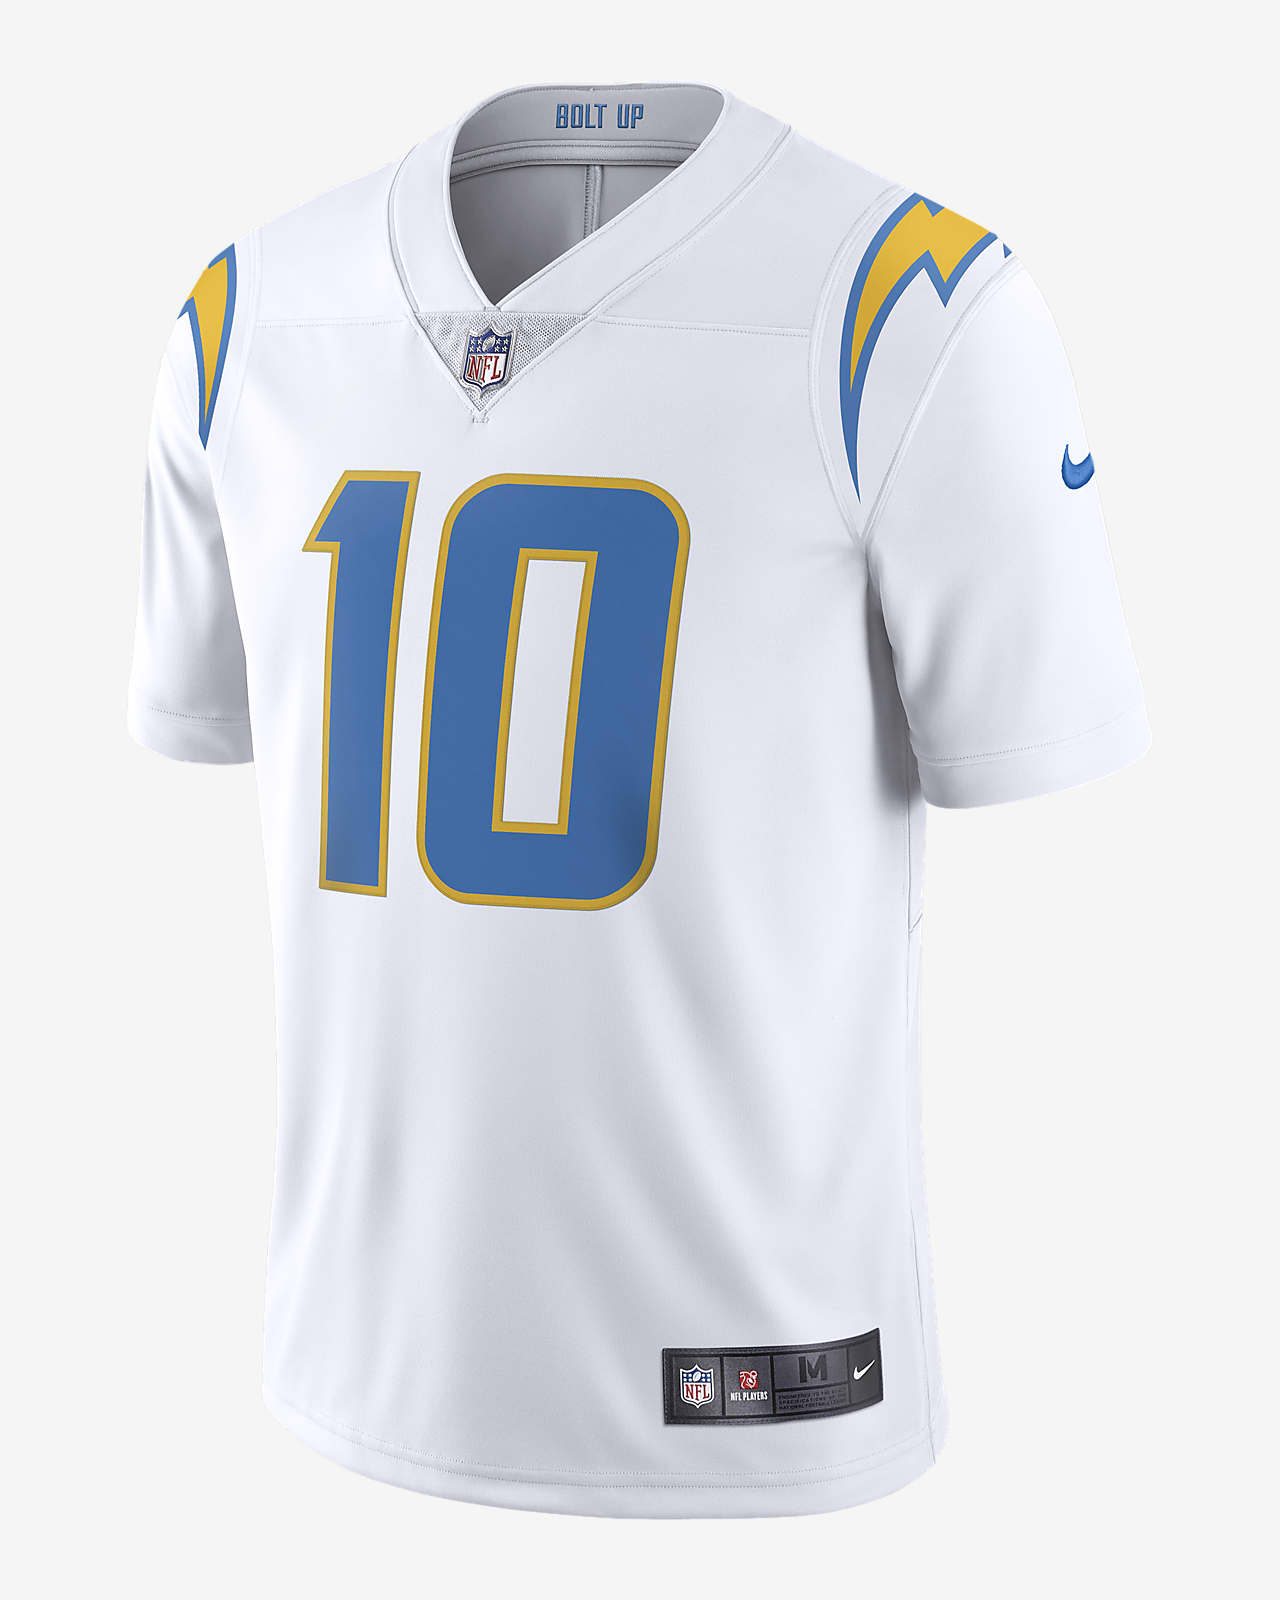 NFL Los Angeles Chargers (Justin Herbet) Men's Game Football Jersey.